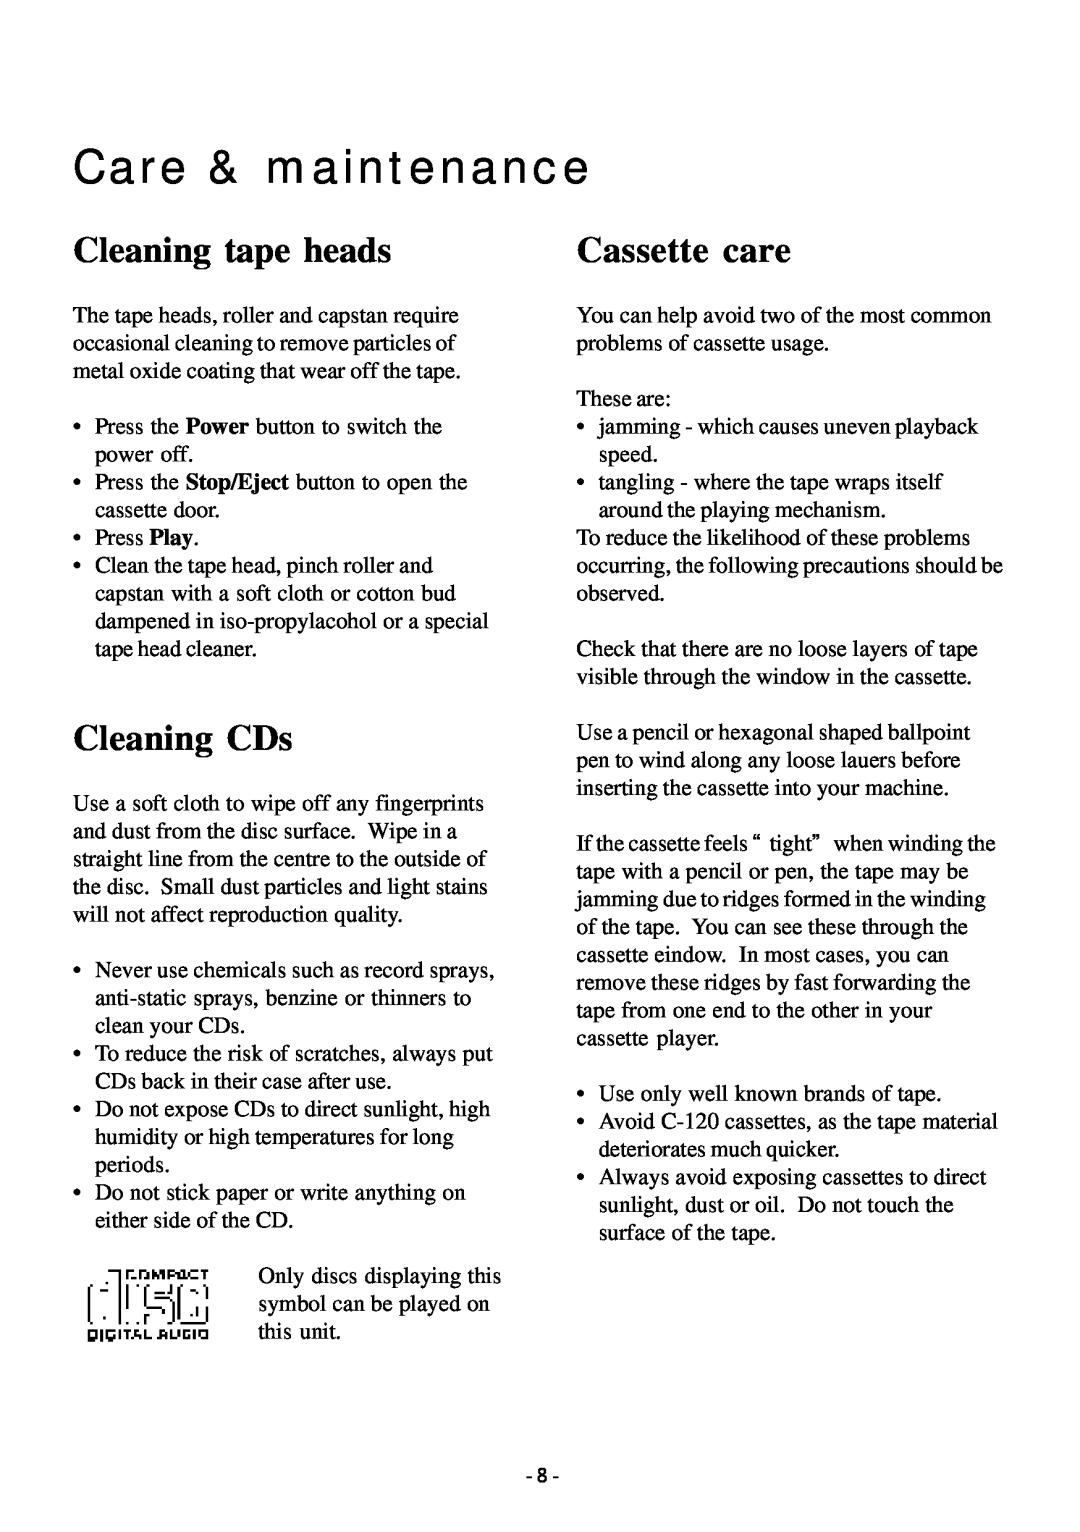 Sylvania SRCD348 manual Care & maintenance, Cleaning tape heads, Cleaning CDs, Cassette care 